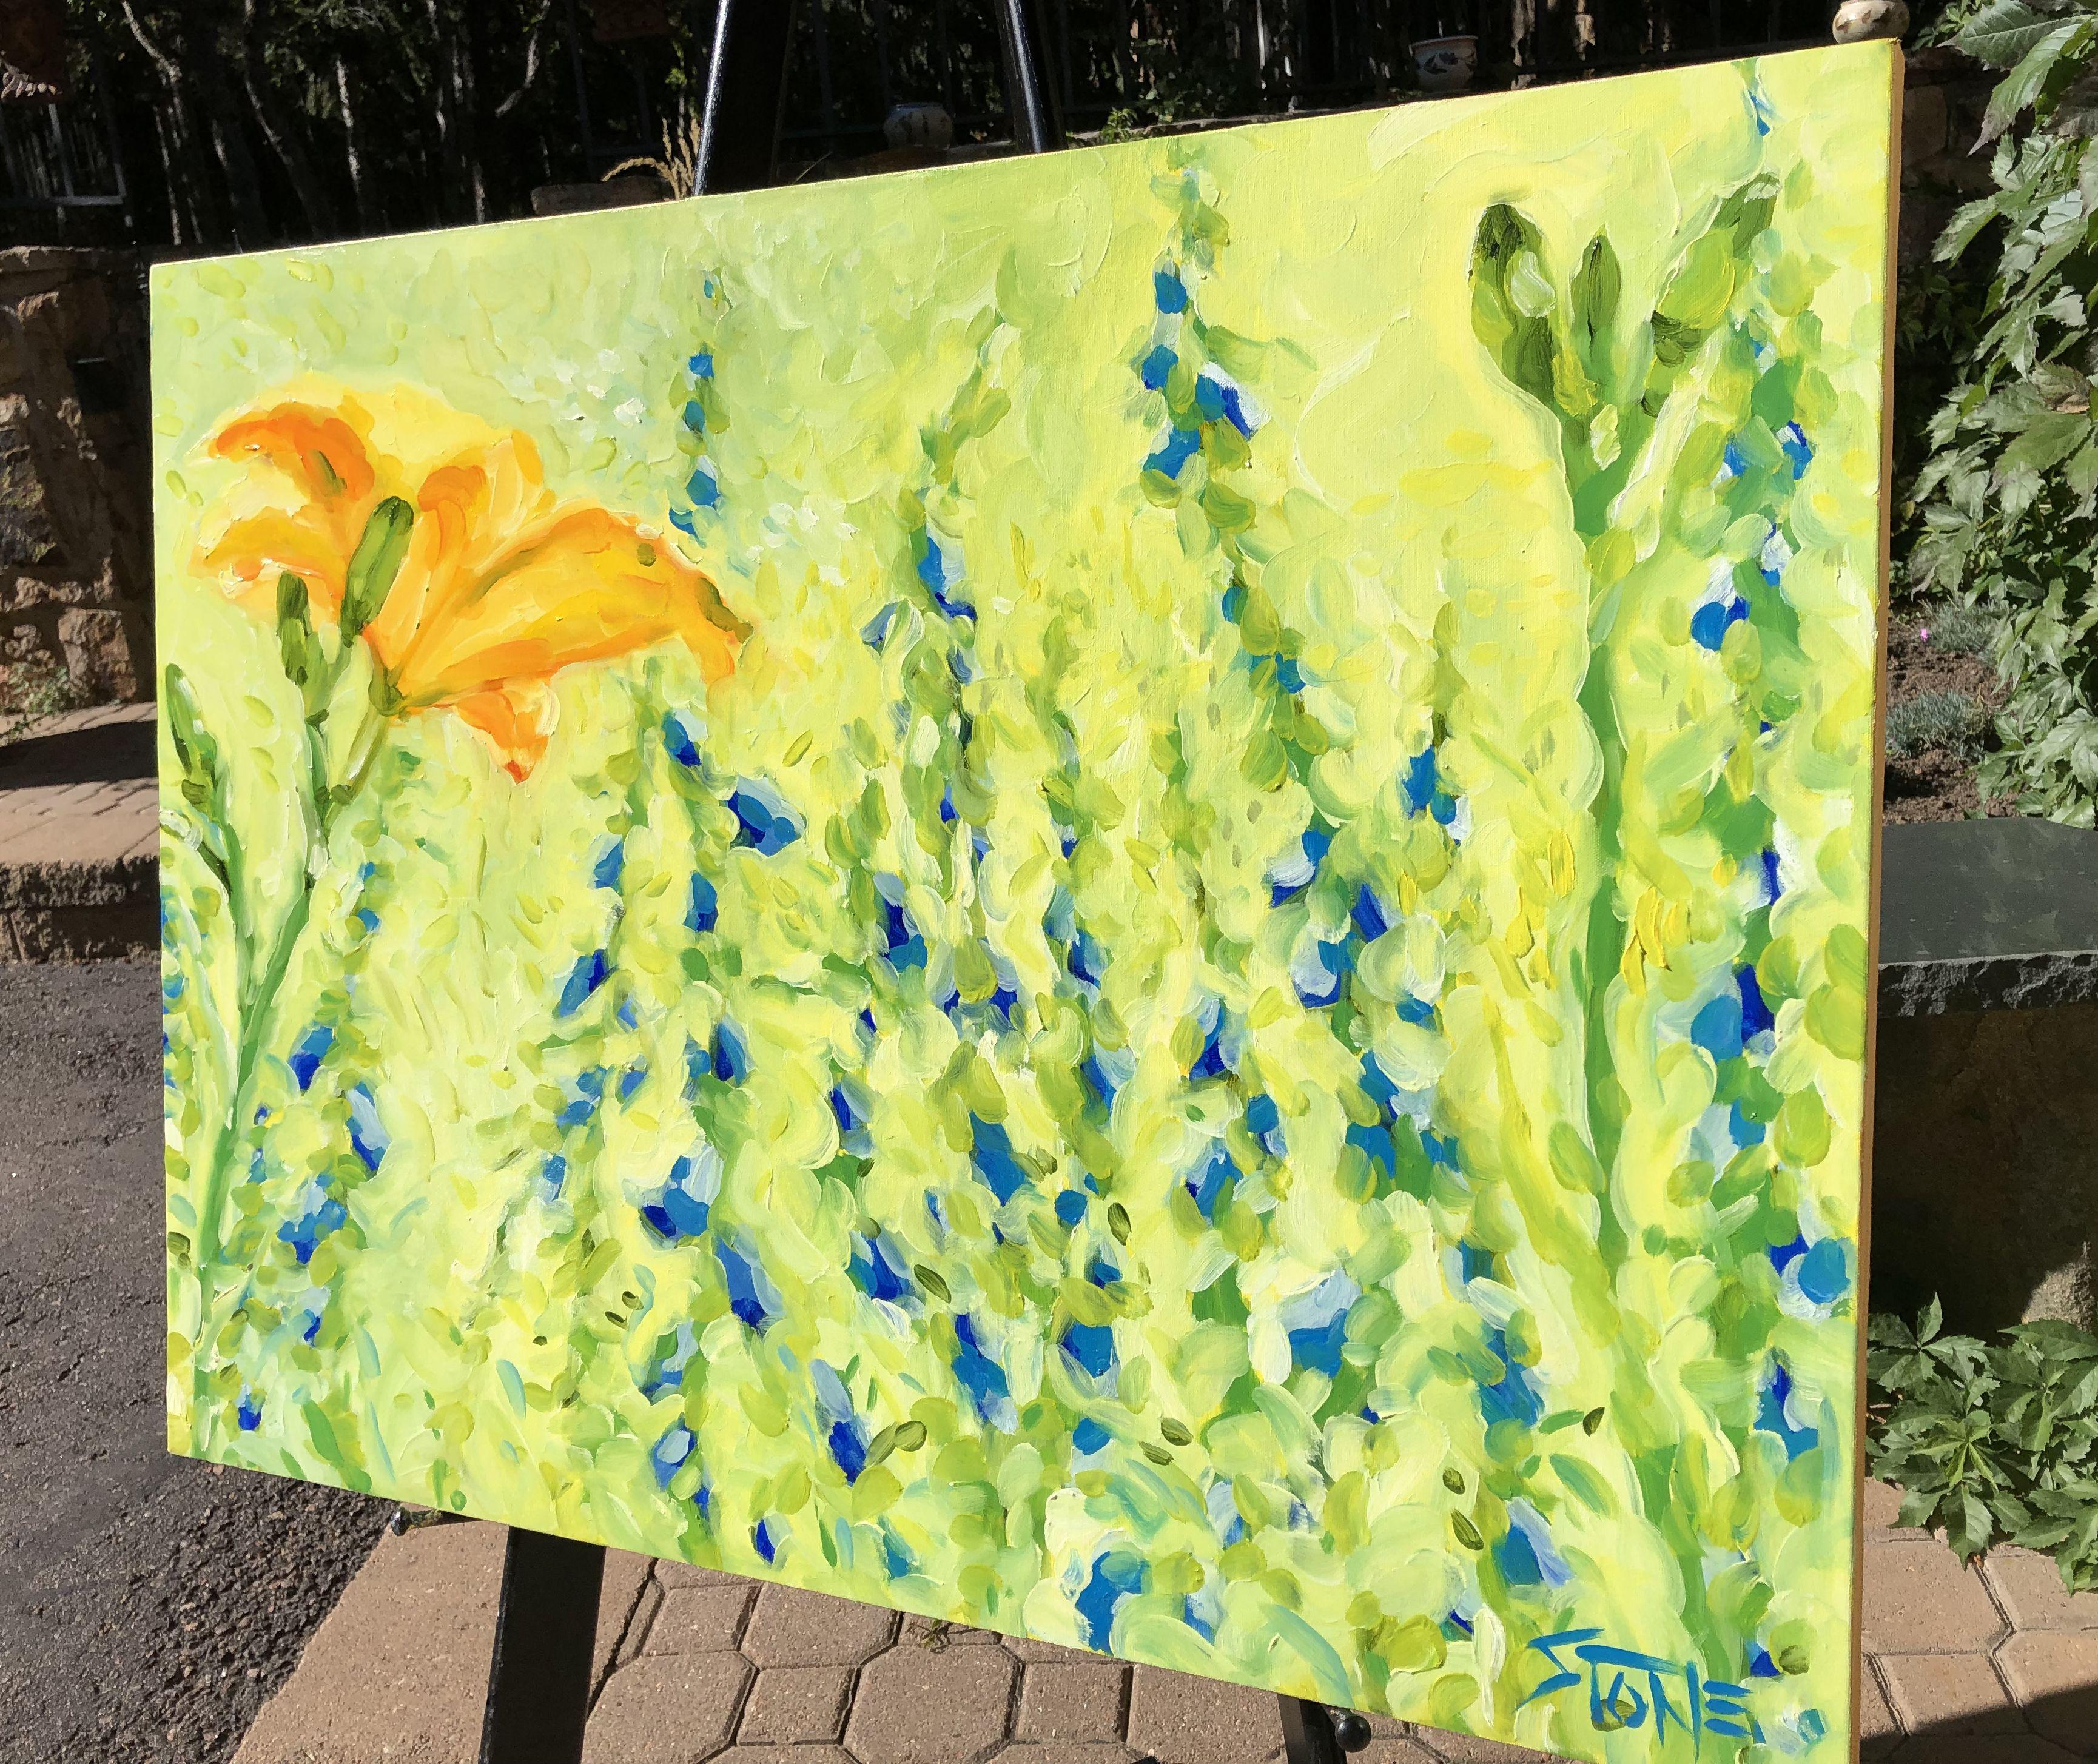 Plein air painting in the garden on a hot summer day. :: Painting :: Impressionist :: This piece comes with an official certificate of authenticity signed by the artist :: Ready to Hang: Yes :: Signed: Yes :: Signature Location: bottom right ::